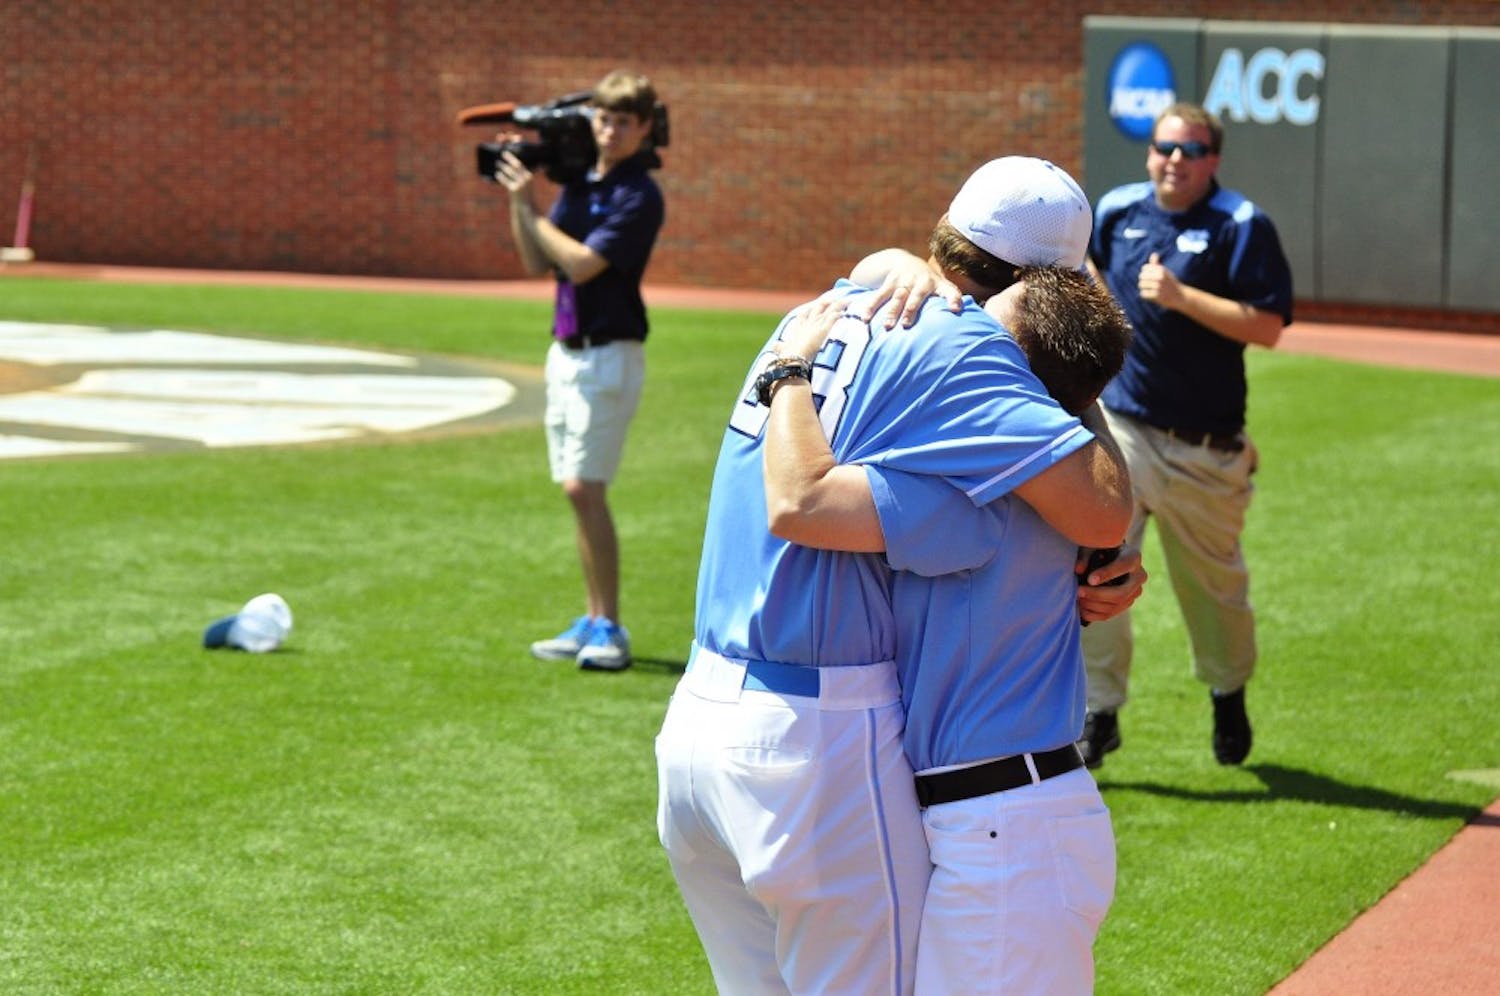 Bryant Gaines, assistant coach for the Tar Heels, embraces a staff member after the game.